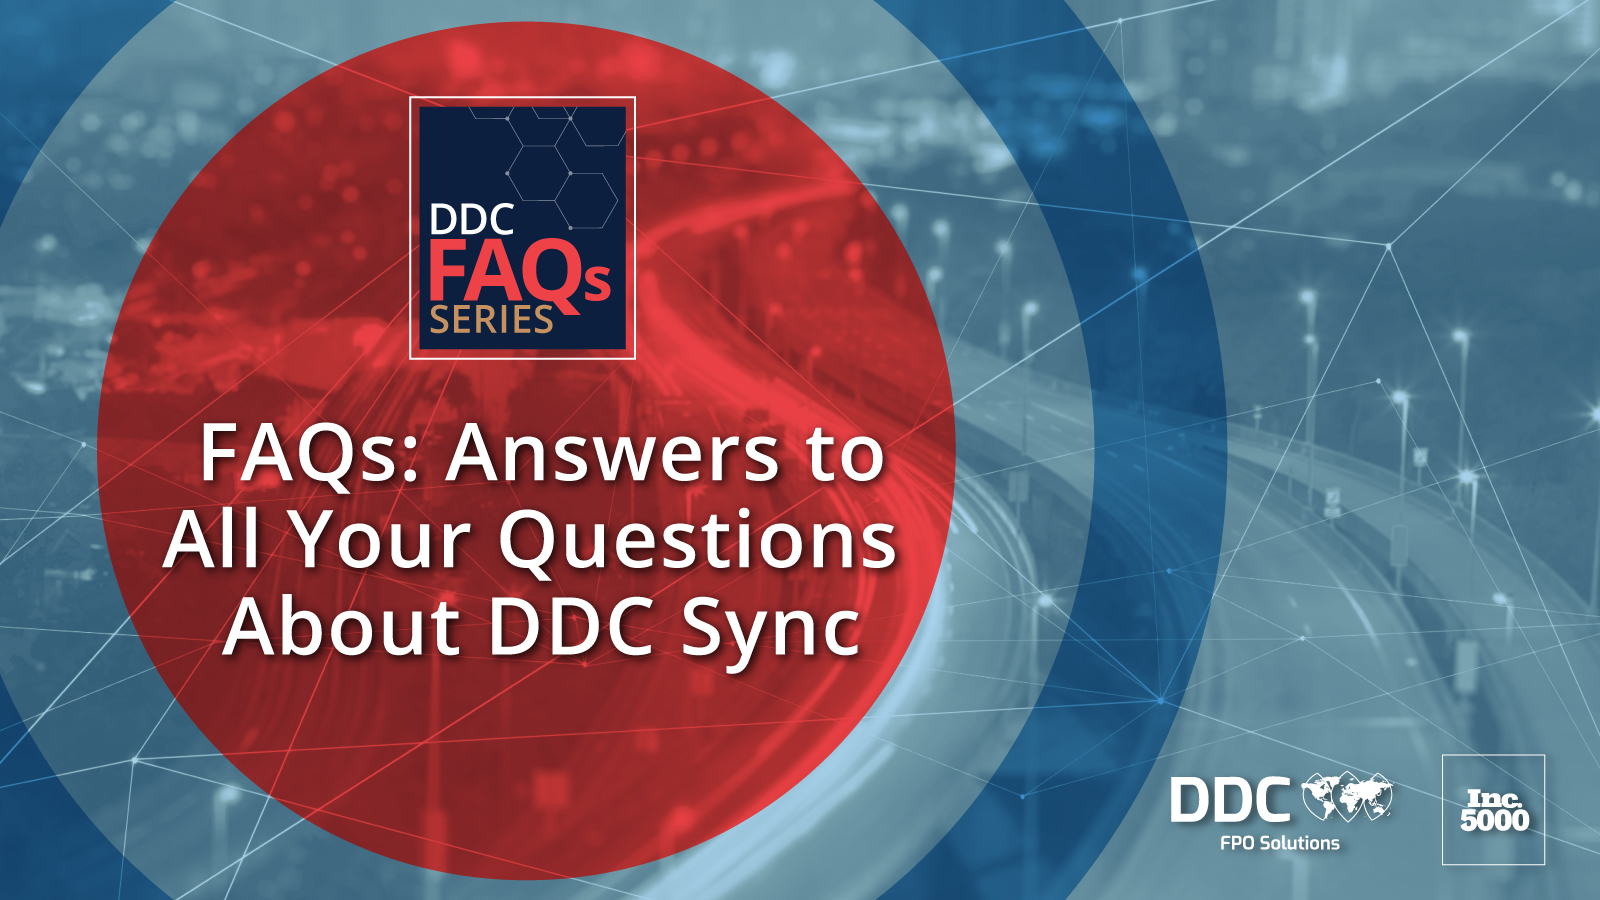 FAQs: Answers to All Your Questions About DDC Sync